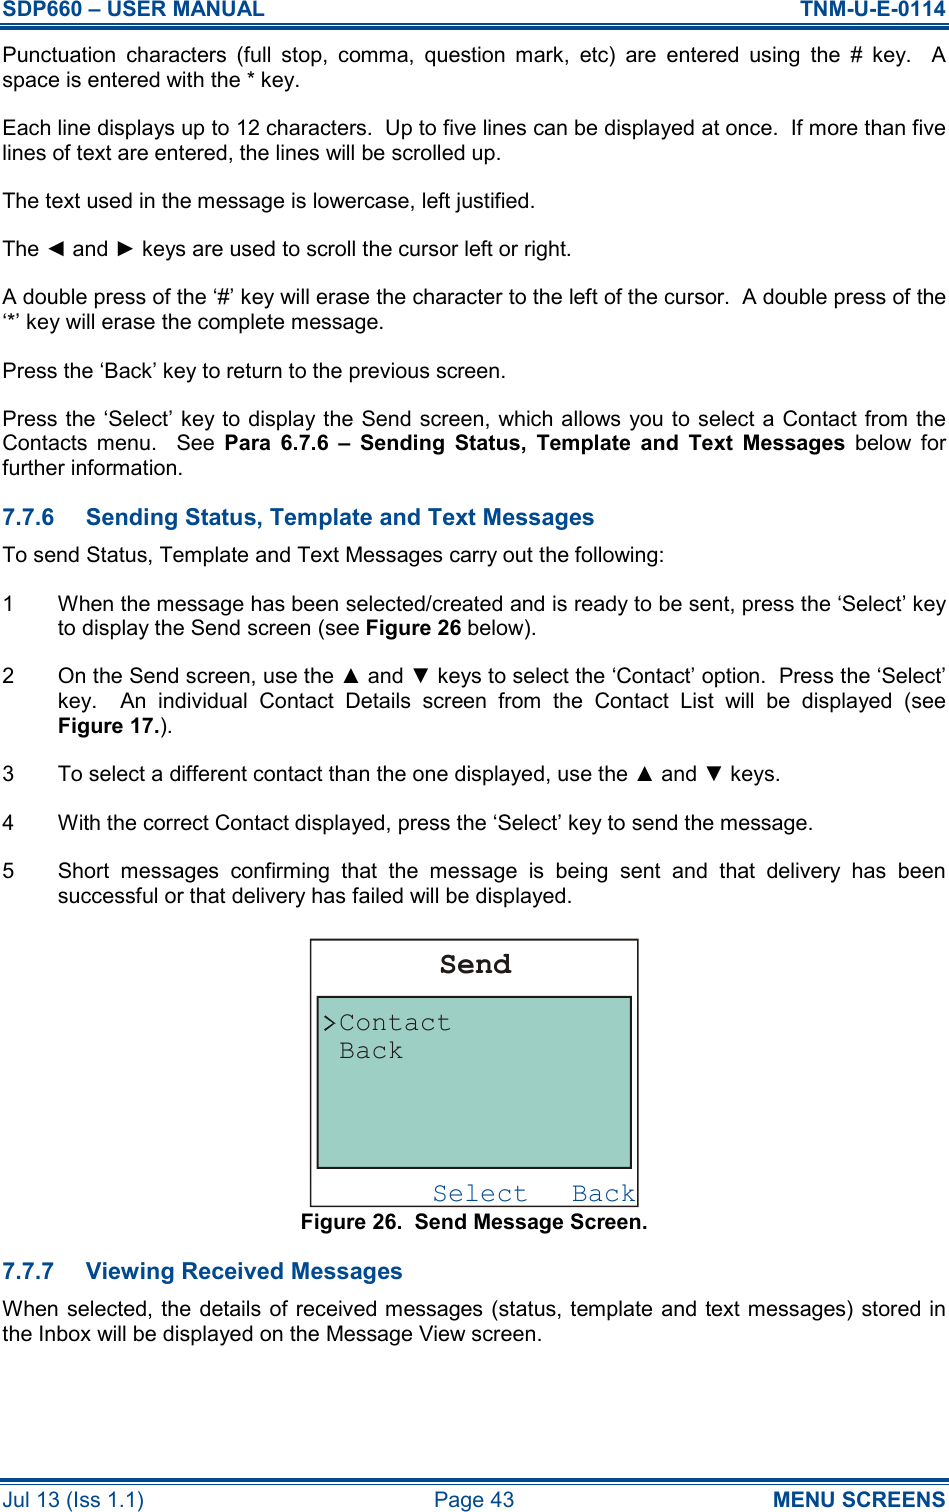 SDP660 – USER MANUAL  TNM-U-E-0114 Jul 13 (Iss 1.1)  Page 43  MENU SCREENS Punctuation  characters  (full  stop,  comma,  question  mark,  etc)  are  entered  using  the  #  key.    A space is entered with the * key. Each line displays up to 12 characters.  Up to five lines can be displayed at once.  If more than five lines of text are entered, the lines will be scrolled up. The text used in the message is lowercase, left justified. The ◄ and ► keys are used to scroll the cursor left or right. A double press of the ‘#’ key will erase the character to the left of the cursor.  A double press of the ‘*’ key will erase the complete message. Press the ‘Back’ key to return to the previous screen. Press the ‘Select’ key to display the Send screen, which allows you to select a Contact from the Contacts  menu.    See  Para  6.7.6  –  Sending  Status,  Template  and  Text  Messages  below  for further information. 7.7.6  Sending Status, Template and Text Messages To send Status, Template and Text Messages carry out the following: 1  When the message has been selected/created and is ready to be sent, press the ‘Select’ key to display the Send screen (see Figure 26 below). 2  On the Send screen, use the ▲ and ▼ keys to select the ‘Contact’ option.  Press the ‘Select’ key.    An  individual  Contact  Details  screen  from  the  Contact  List  will  be  displayed  (see Figure 17.). 3  To select a different contact than the one displayed, use the ▲ and ▼ keys. 4  With the correct Contact displayed, press the ‘Select’ key to send the message. 5  Short  messages  confirming  that  the  message  is  being  sent  and  that  delivery  has  been successful or that delivery has failed will be displayed. Figure 26.  Send Message Screen. 7.7.7  Viewing Received Messages When selected, the details  of received messages (status, template and text messages) stored in the Inbox will be displayed on the Message View screen. BackSelectSendContactBack